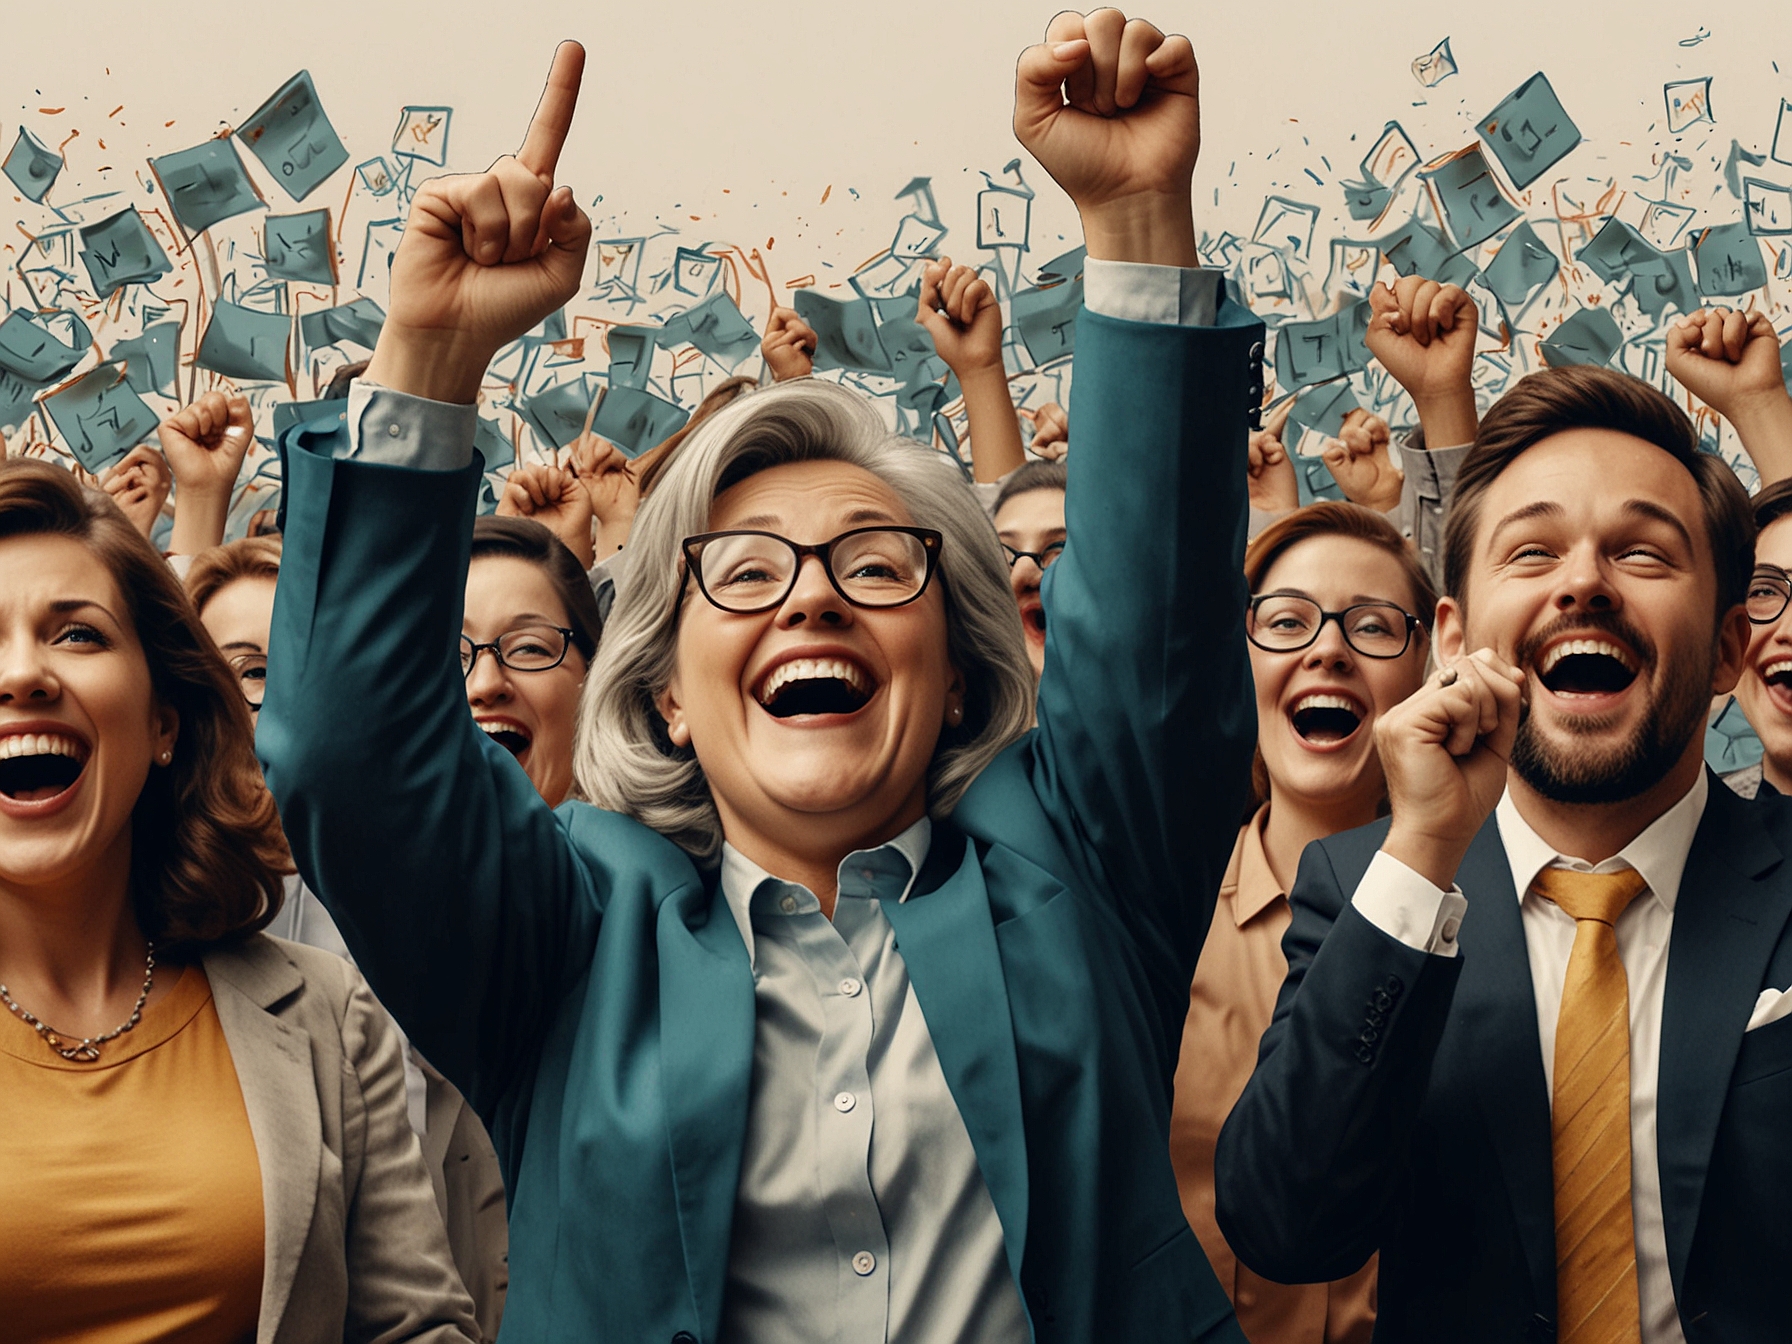 Illustration of diverse taxpayers rejoicing over potential tax relief measures, representing increased purchasing power and optimism for economic growth.